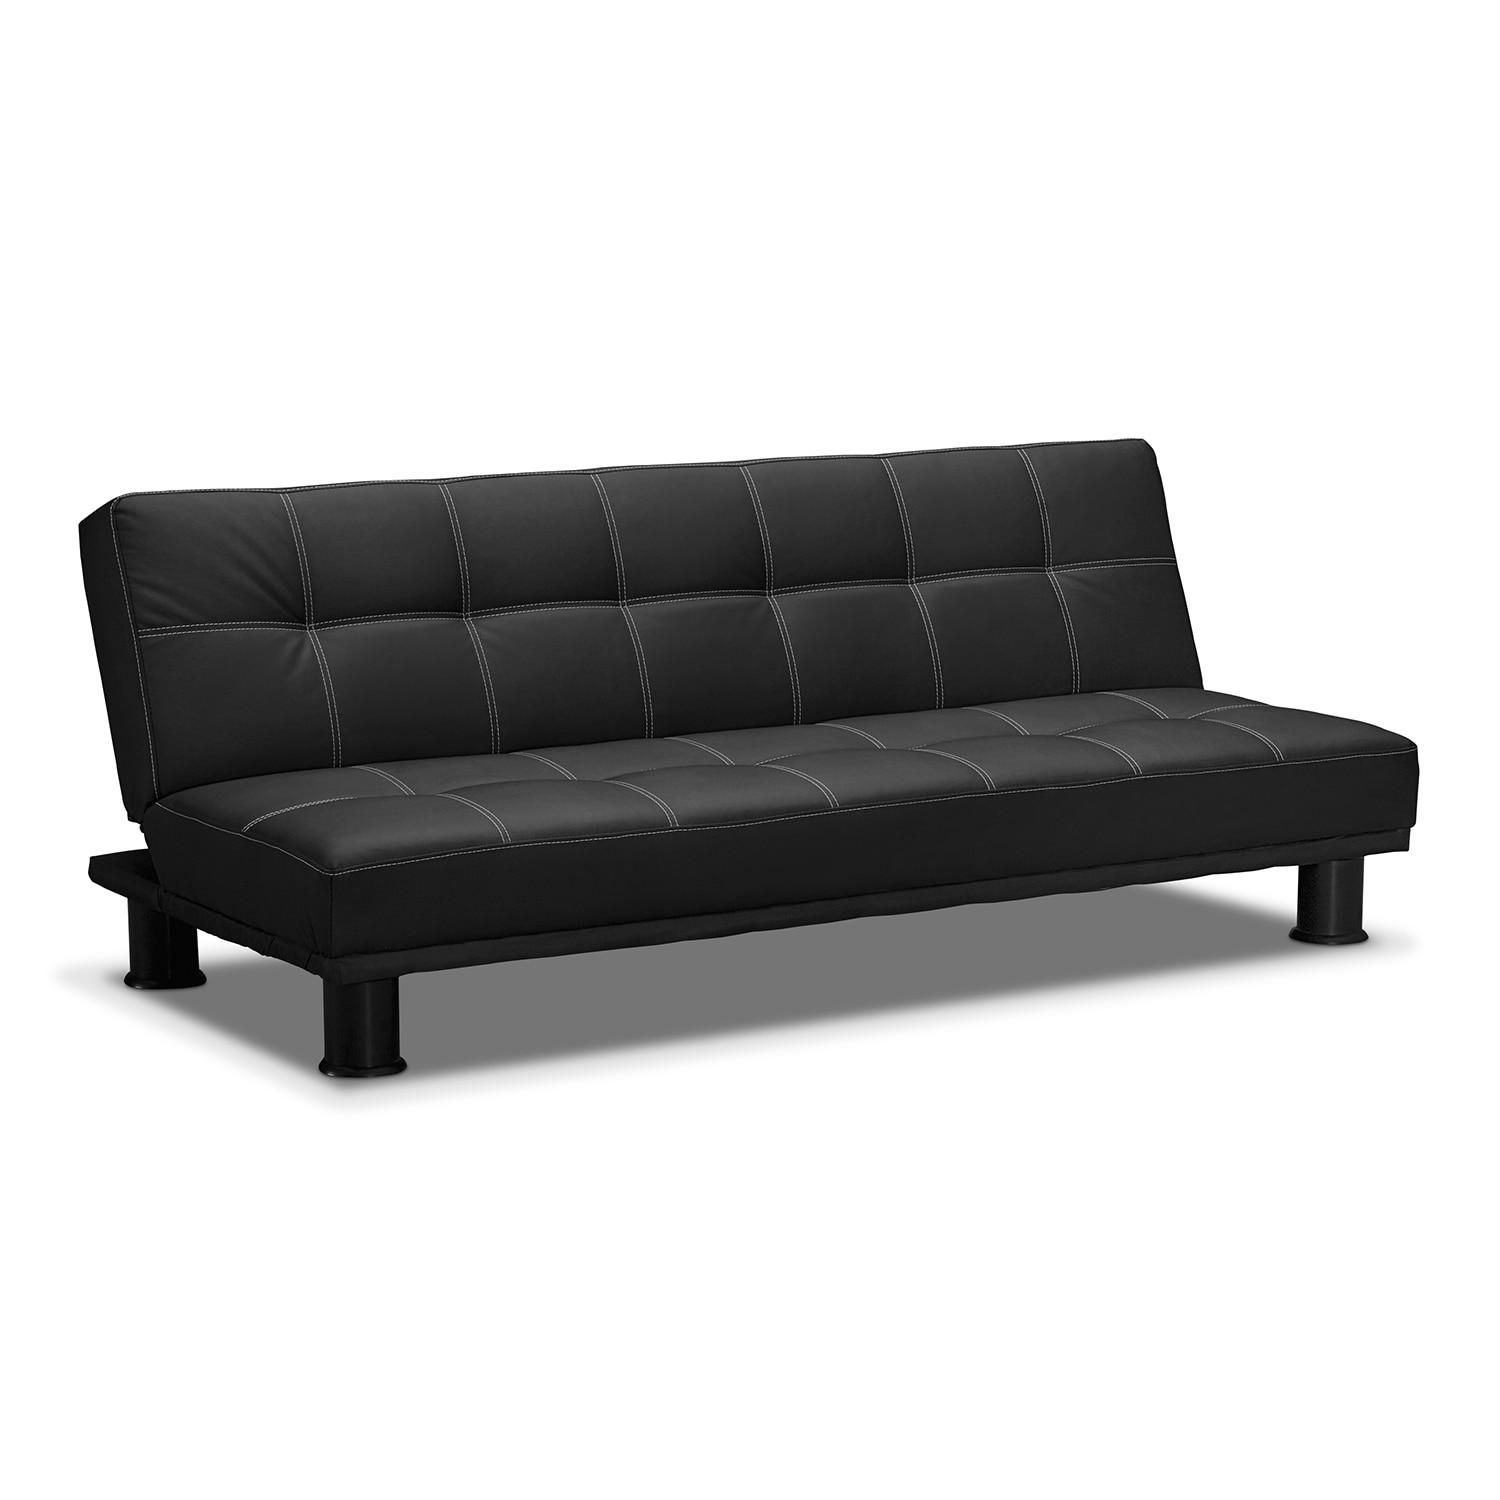 Black Leather Sleeper Sofa Intended For Black Leather Convertible Sofas (View 19 of 20)